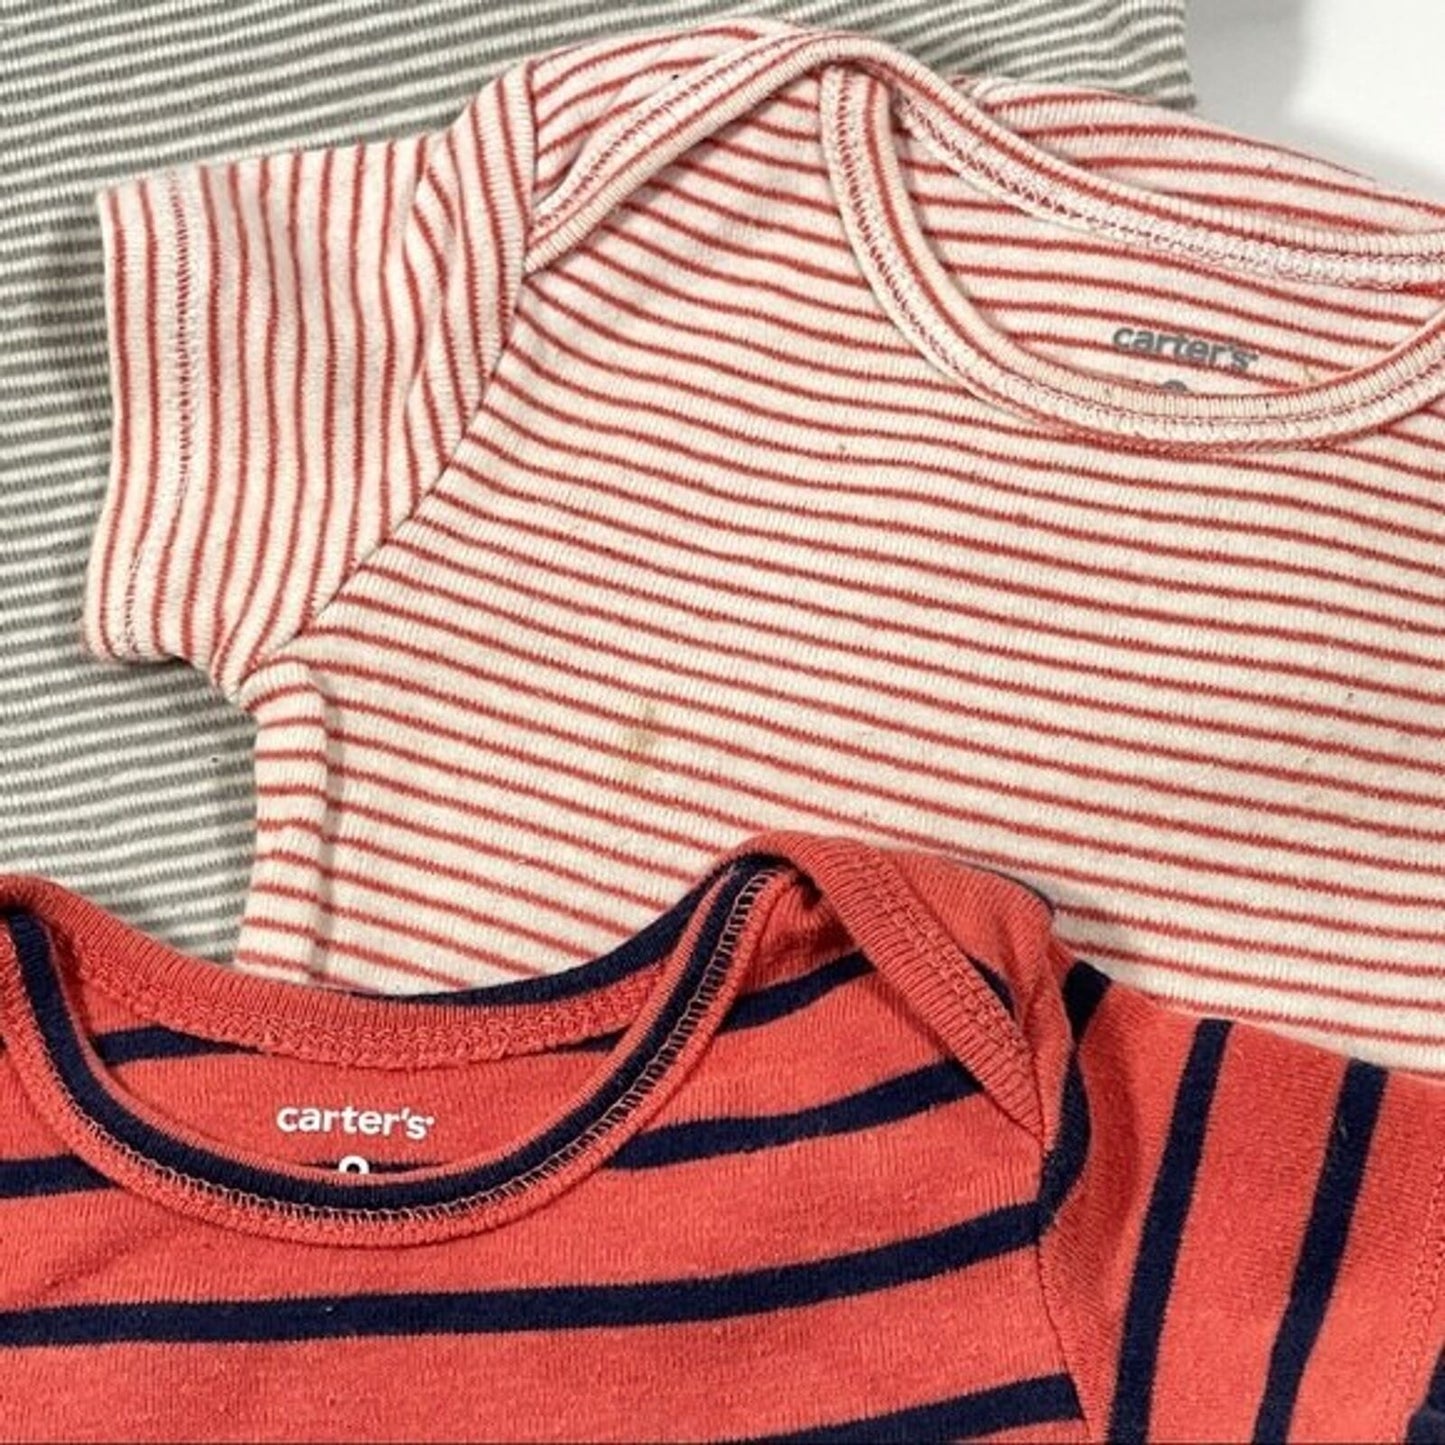 CARTERS Boys Size 9 Months Rompers Striped One Piece Tops